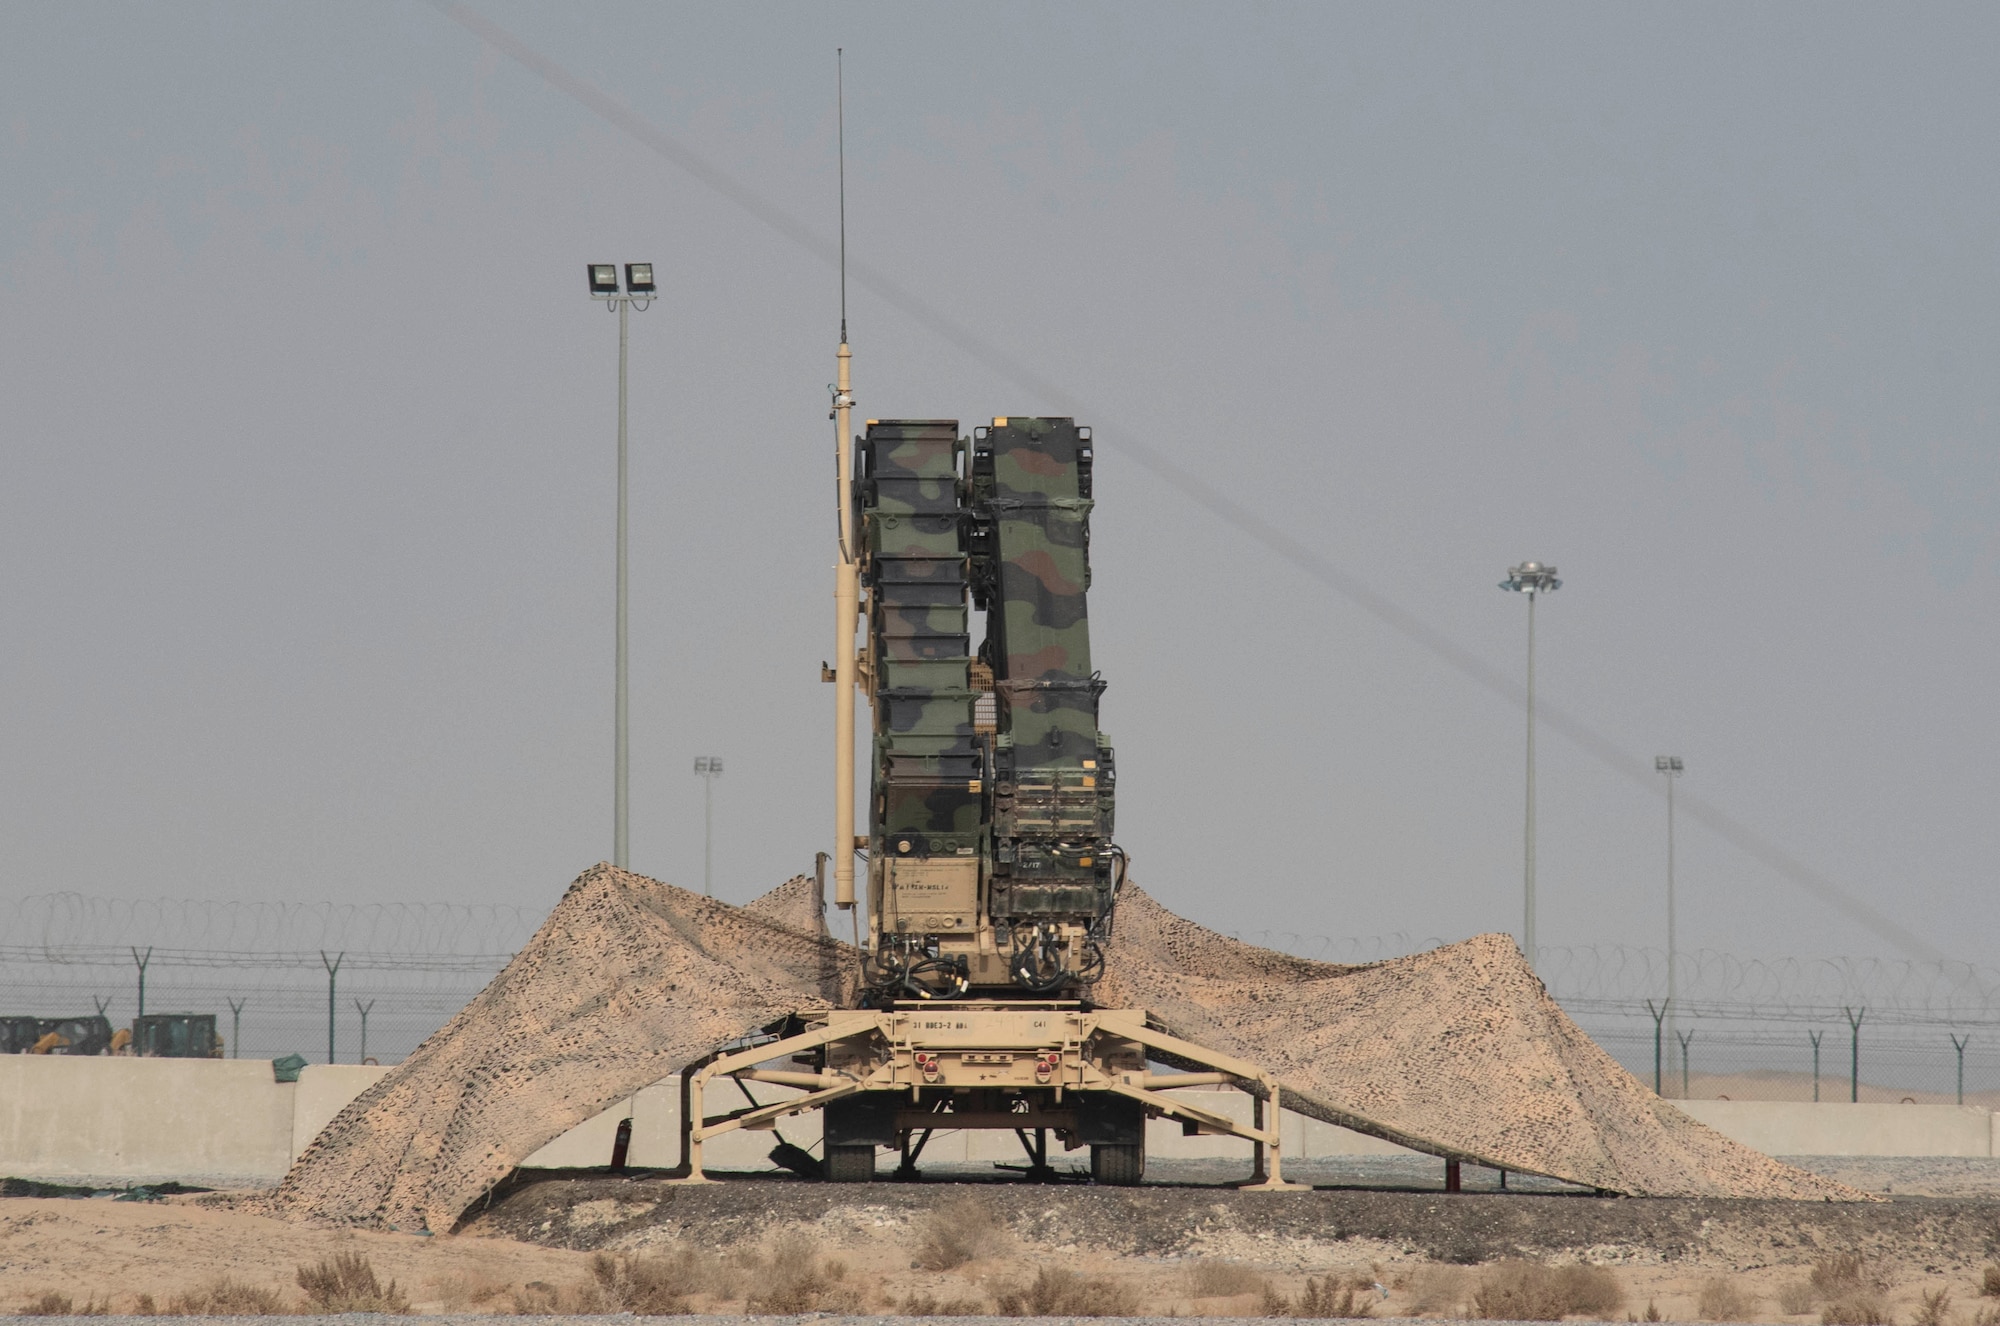 A Patriot missile launcher stands ready to destroy any incoming threats at Ali Al Salem Air Base, Kuwait, Nov. 20, 2020. The Patriot missile system is an integral component to the safety of the base, and is used to seek and destroy aerial threats. (U.S. Air Force photo by Staff Sgt. Kenneth Boyton)